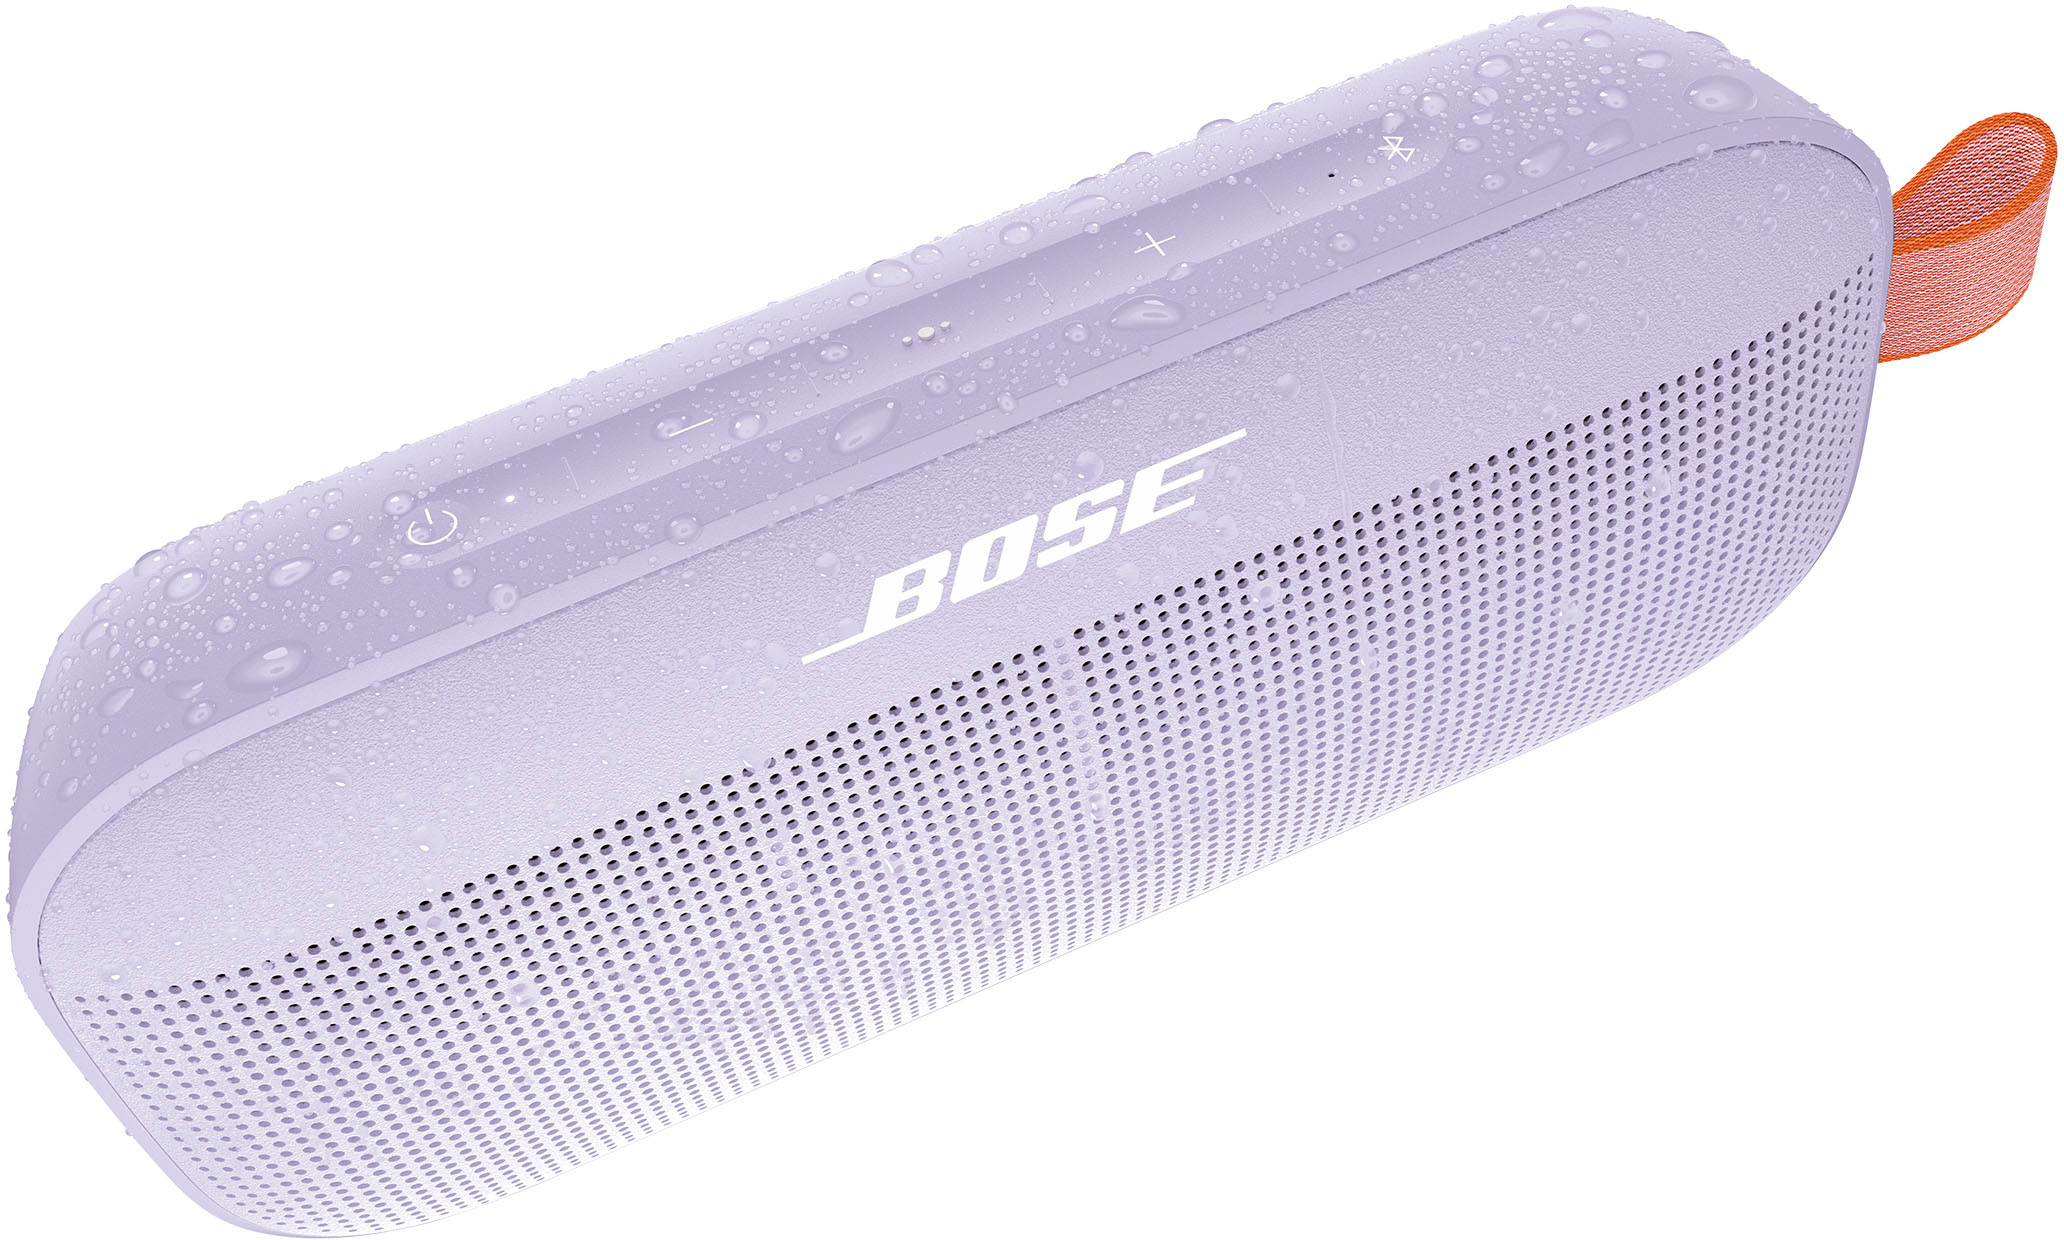 Angle View: Bose - SoundLink Flex Portable Bluetooth Speaker with Waterproof/Dustproof Design - Chilled Lilac